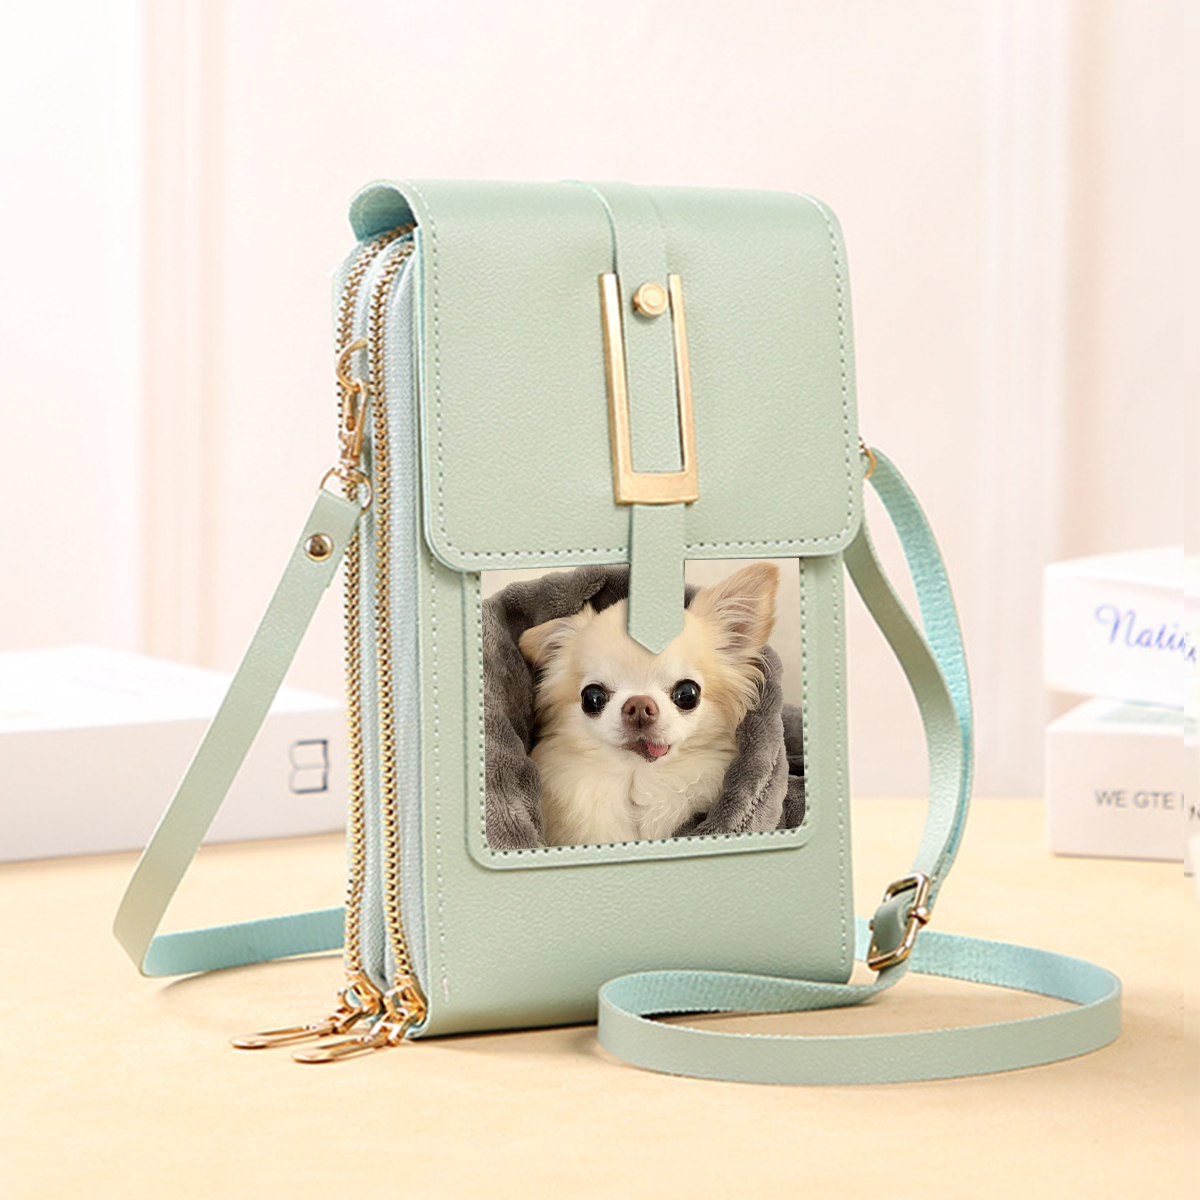 Personalized With Your Pet's Photo - Mint